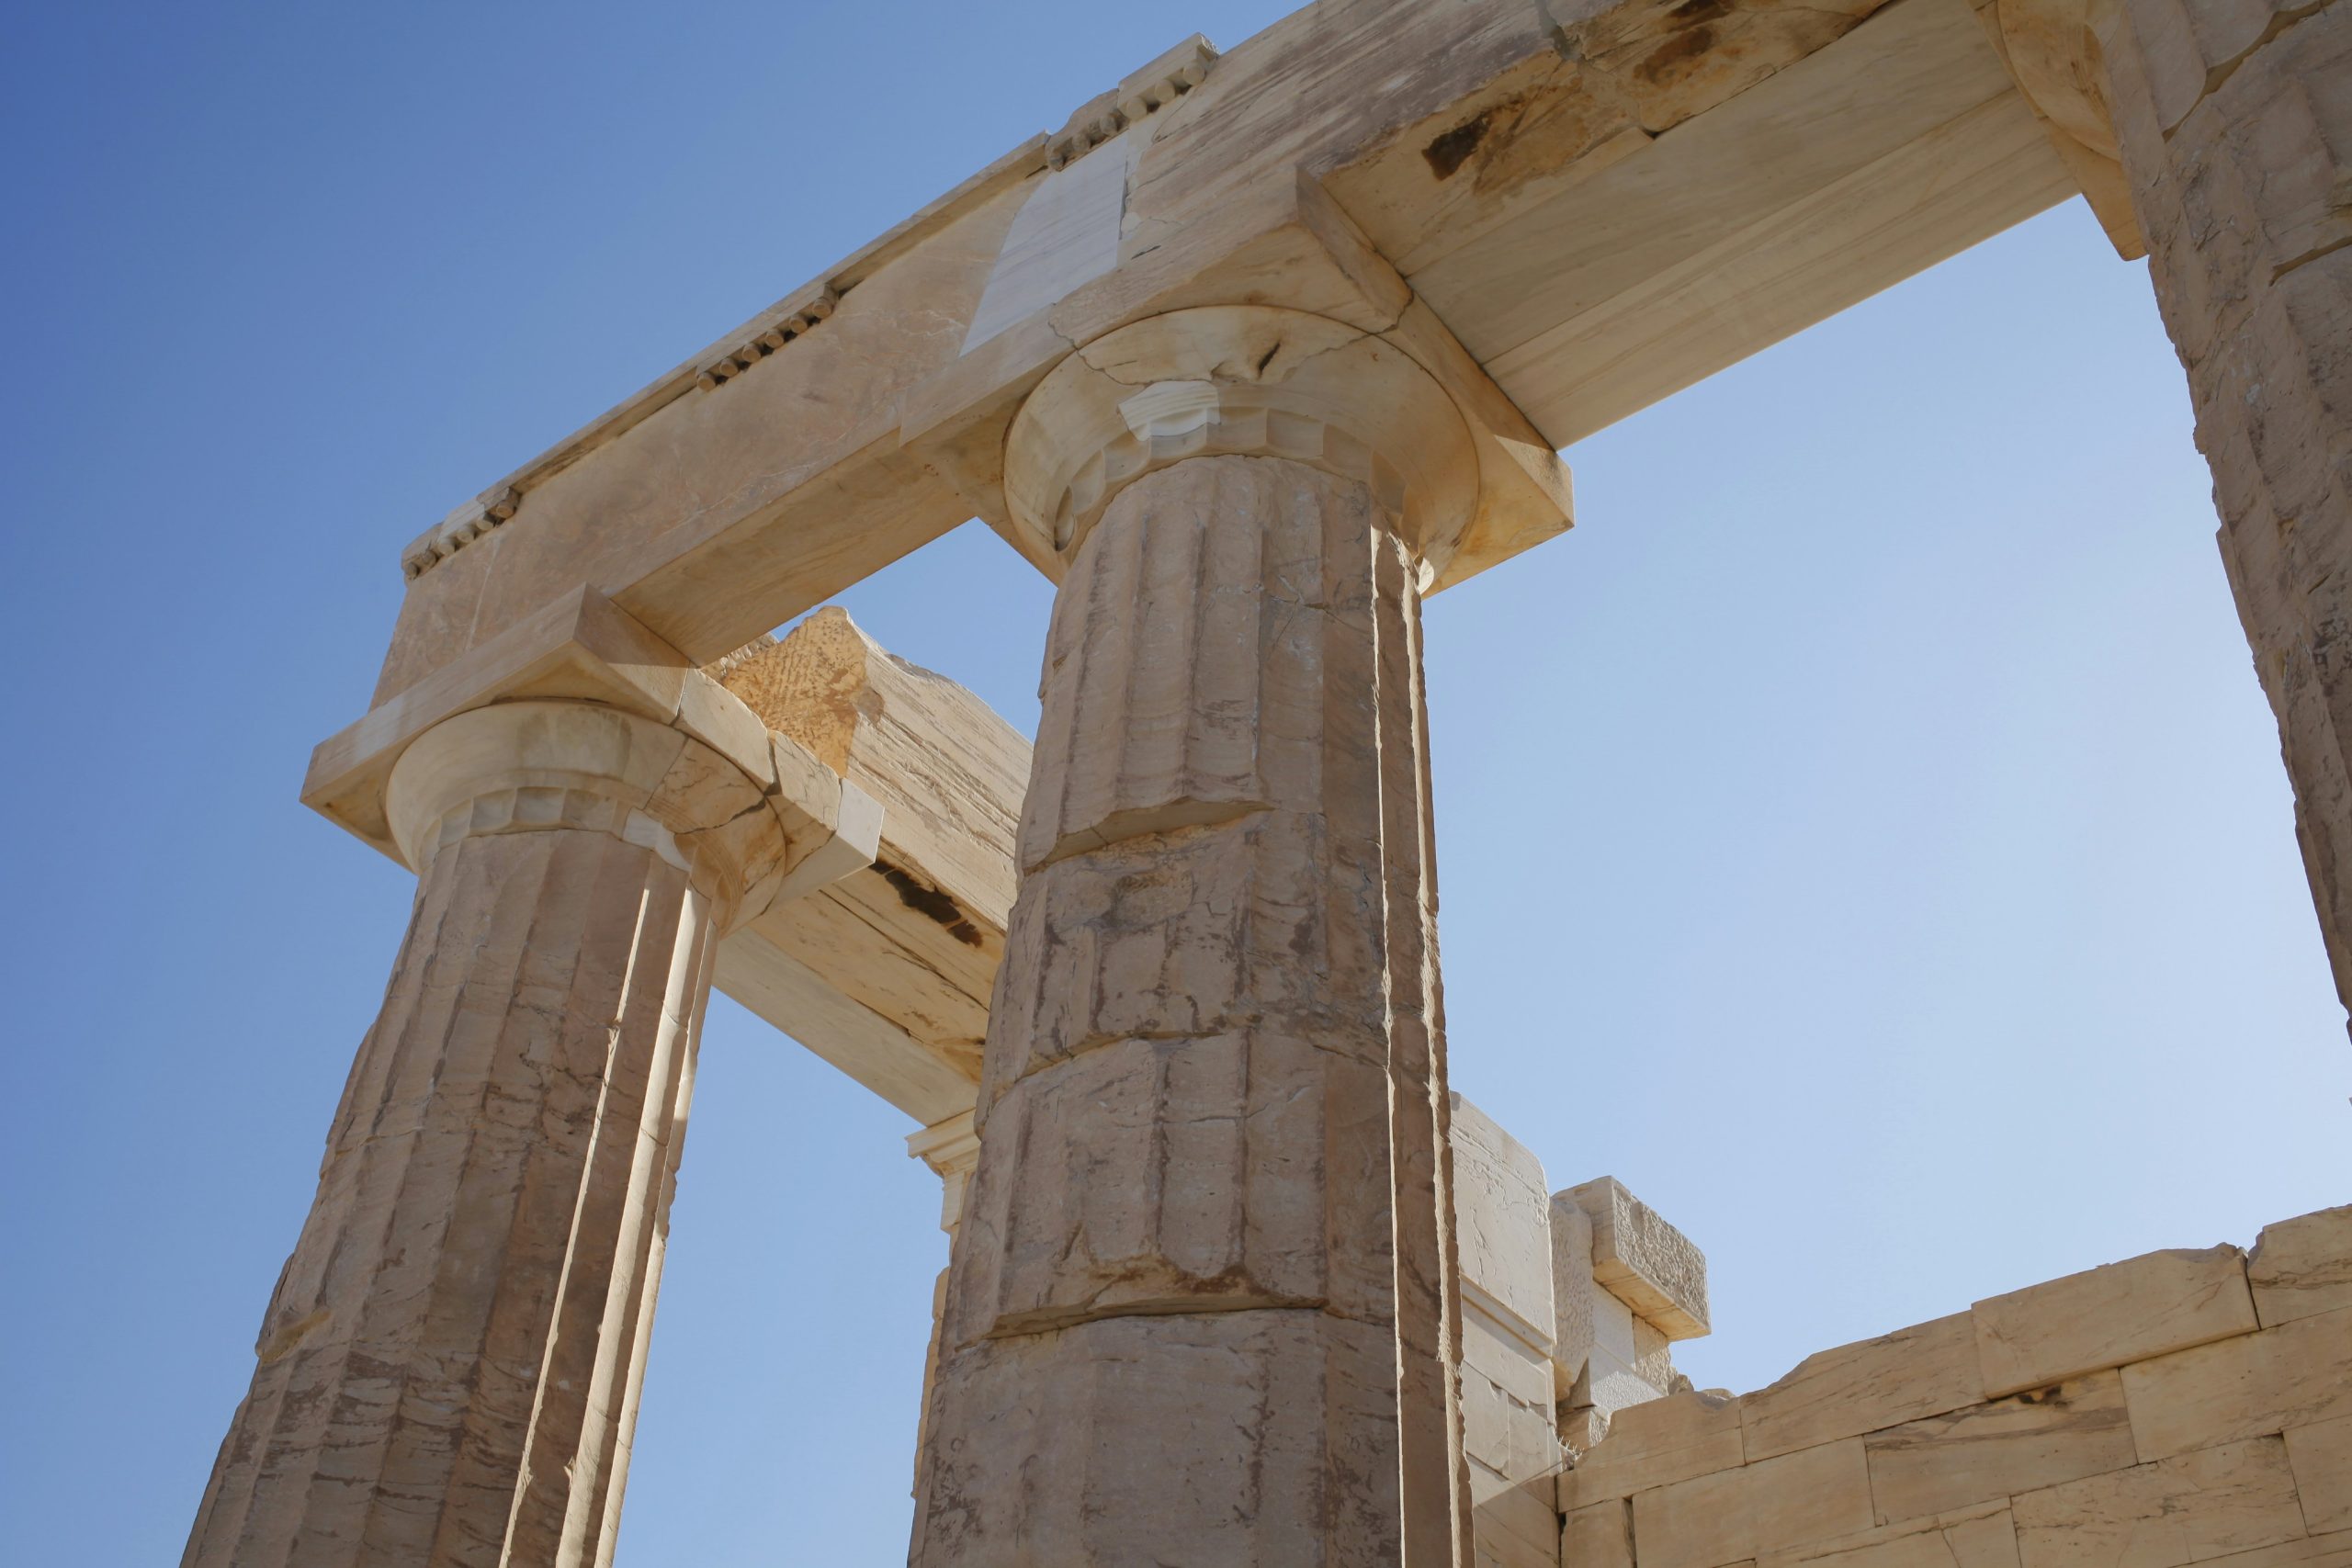 discover the rich history and exquisite craftsmanship of greek architecture, from majestic temples to iconic columns and intricate stone carvings.